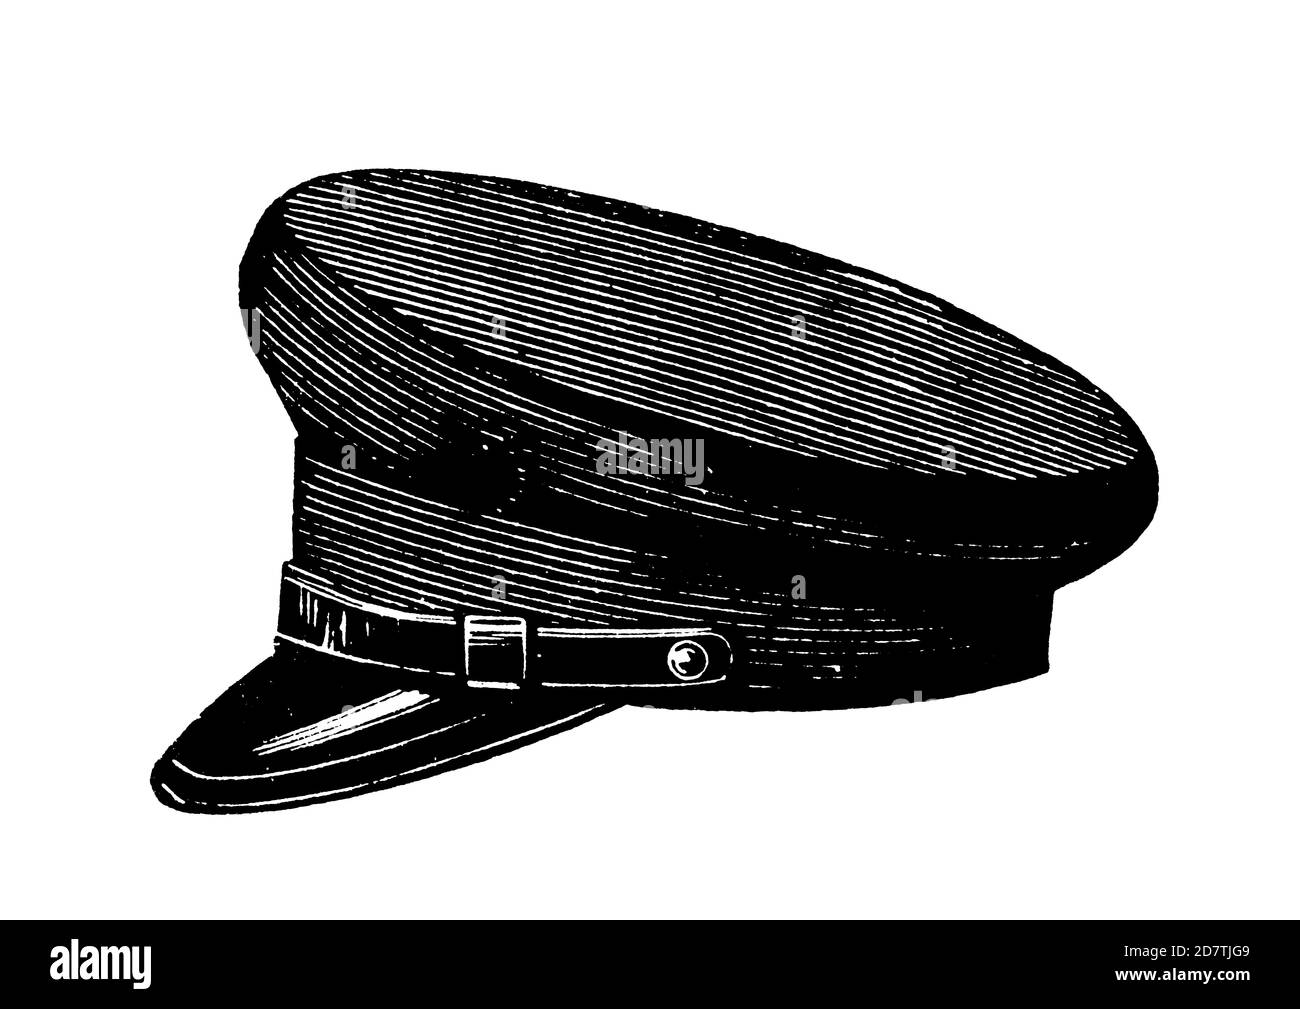 19th-century engraving of a peaked cap (isolated on white). Published in Specimens des divers caracteres et vignettes typographiques de la fonderie by Stock Photo